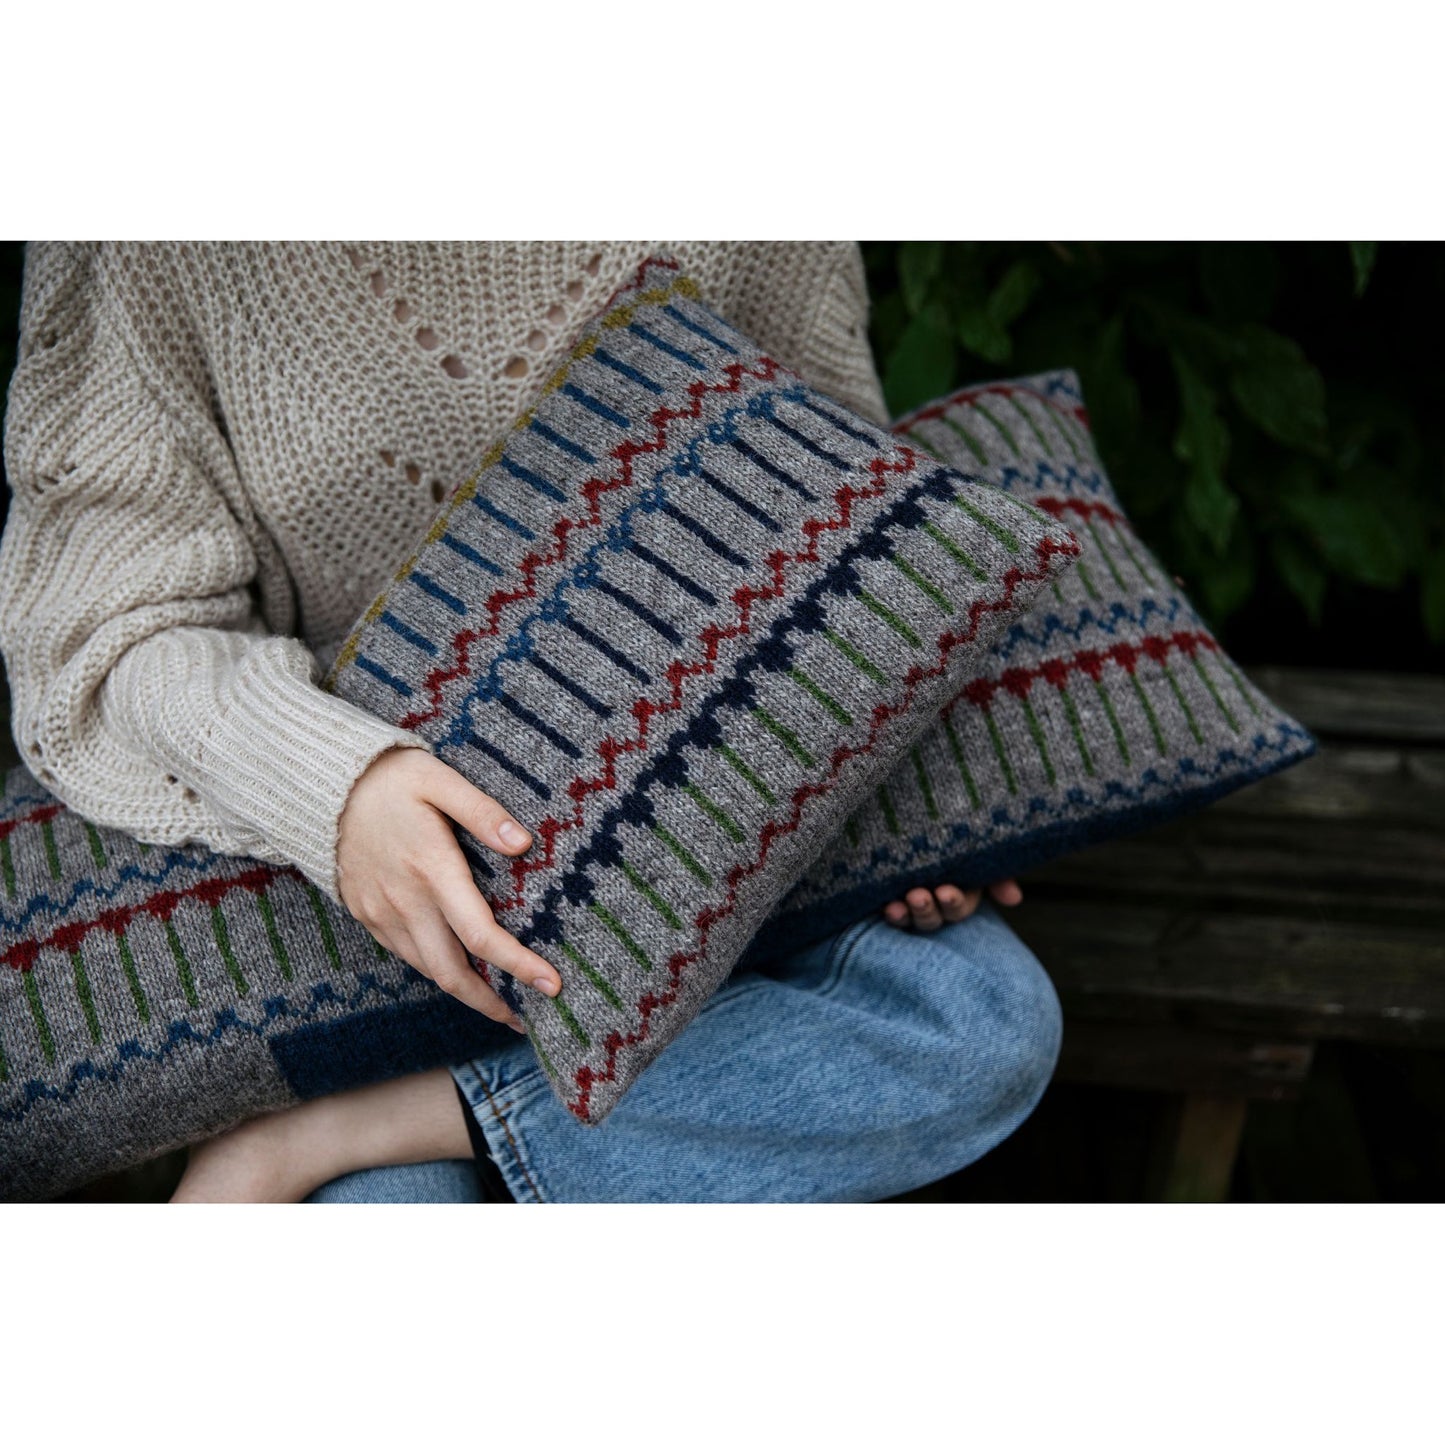 The Knitted Fabric: Colourwork Projects for You and Your Home by Dee Hardwicke